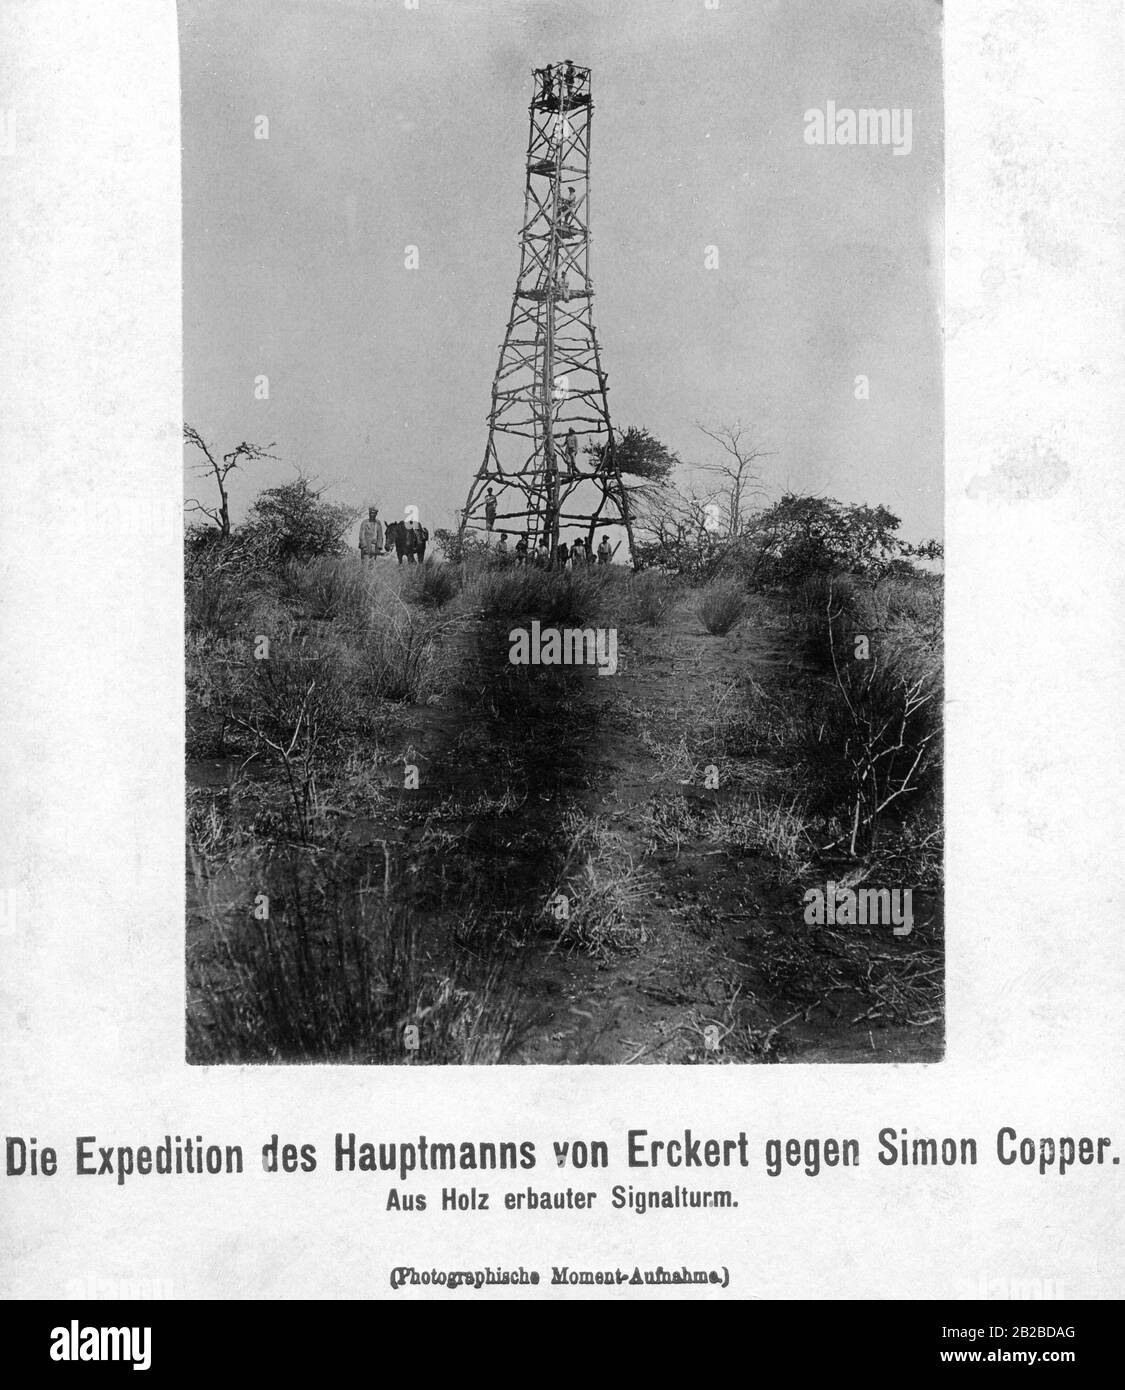 Wooden signal tower built by the German Schutztruppen in South West Africa. Here, the native inhabitants rose against German supremacy, first under the leadership of Hendrik Witbooi and after his death in 1905 under Simon Copper. The German campaign under Captain Friedrich von Erckert was directed against them. Stock Photo